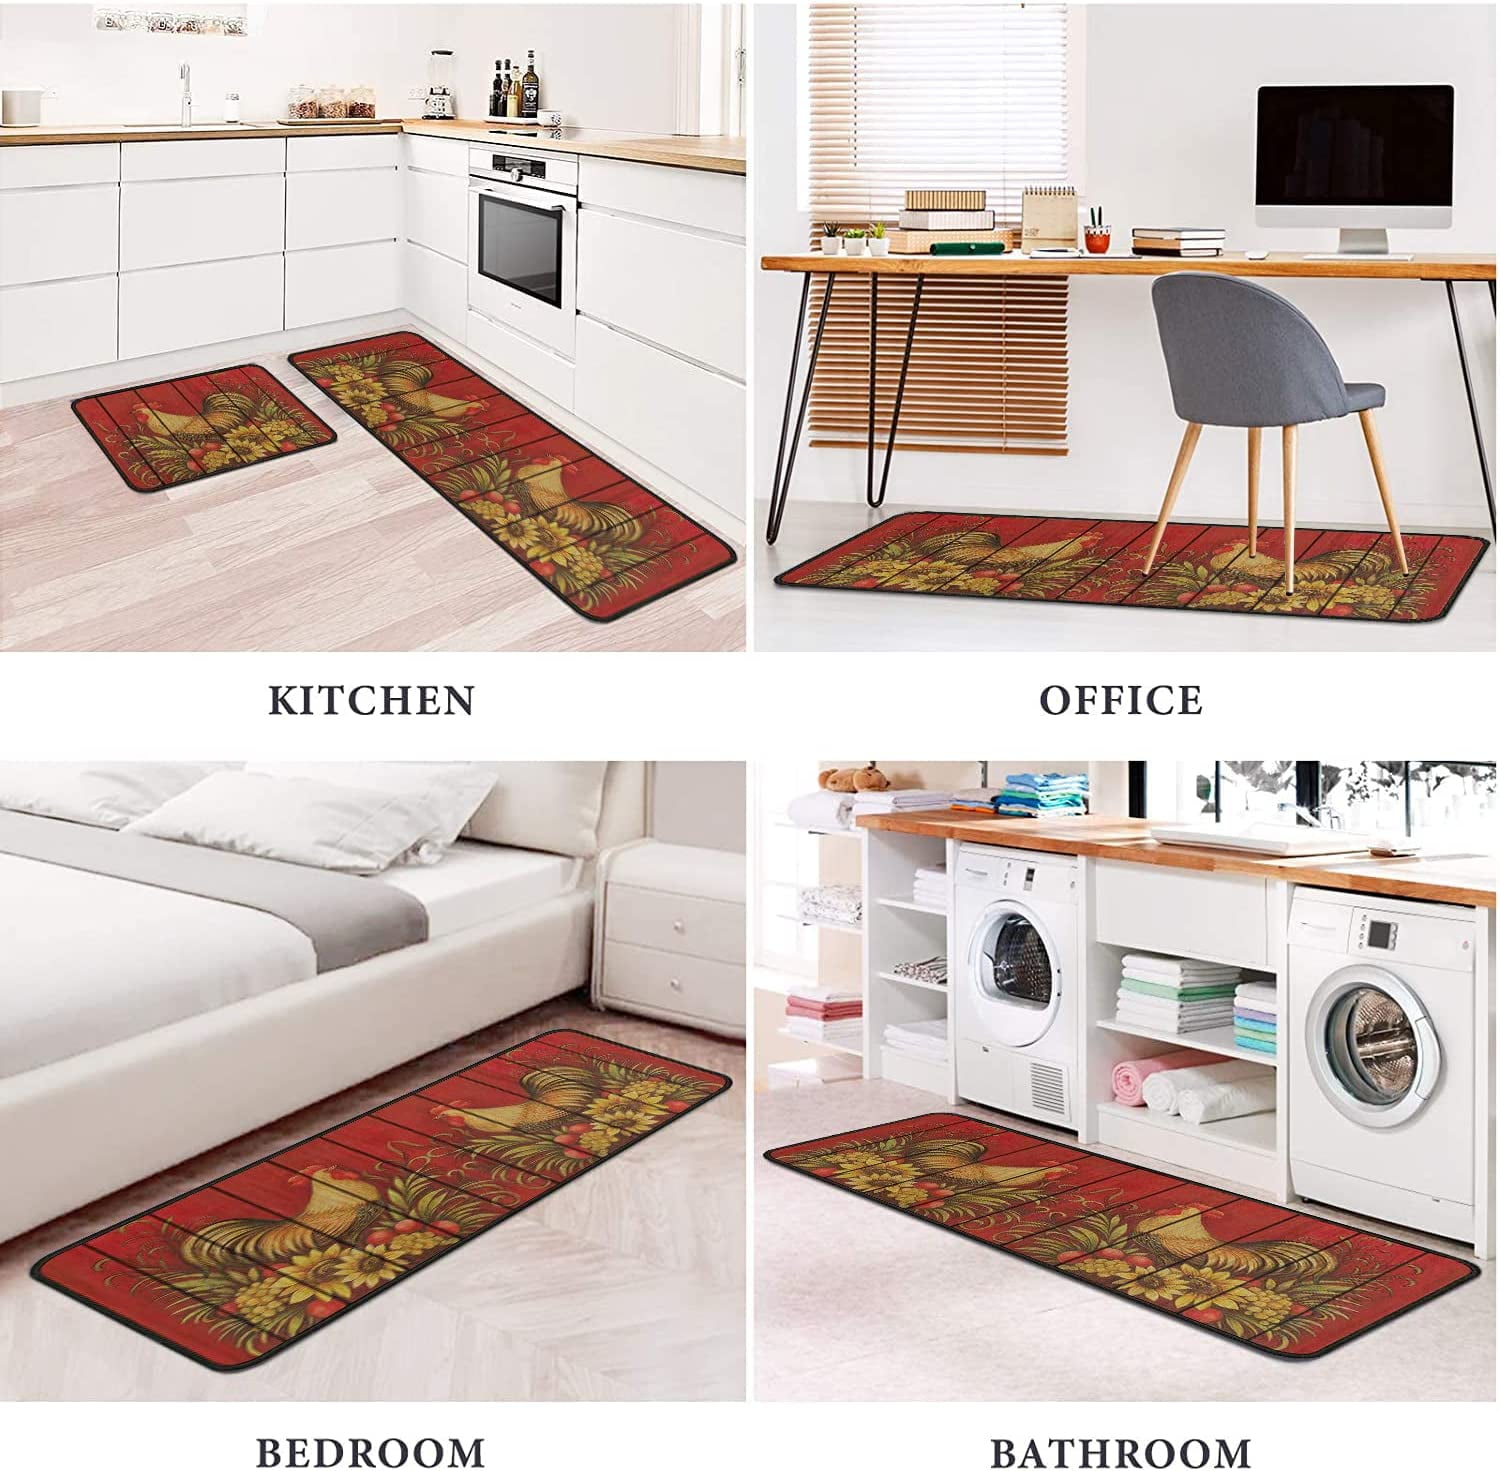  GRTARANY Laundry Room Rug Runner 72 x 24 Inch Non Slip  Waterproof Farmhouse Kitchen Floor Mat Bath Area Rugs for Home Decor  Accessories Red : Home & Kitchen